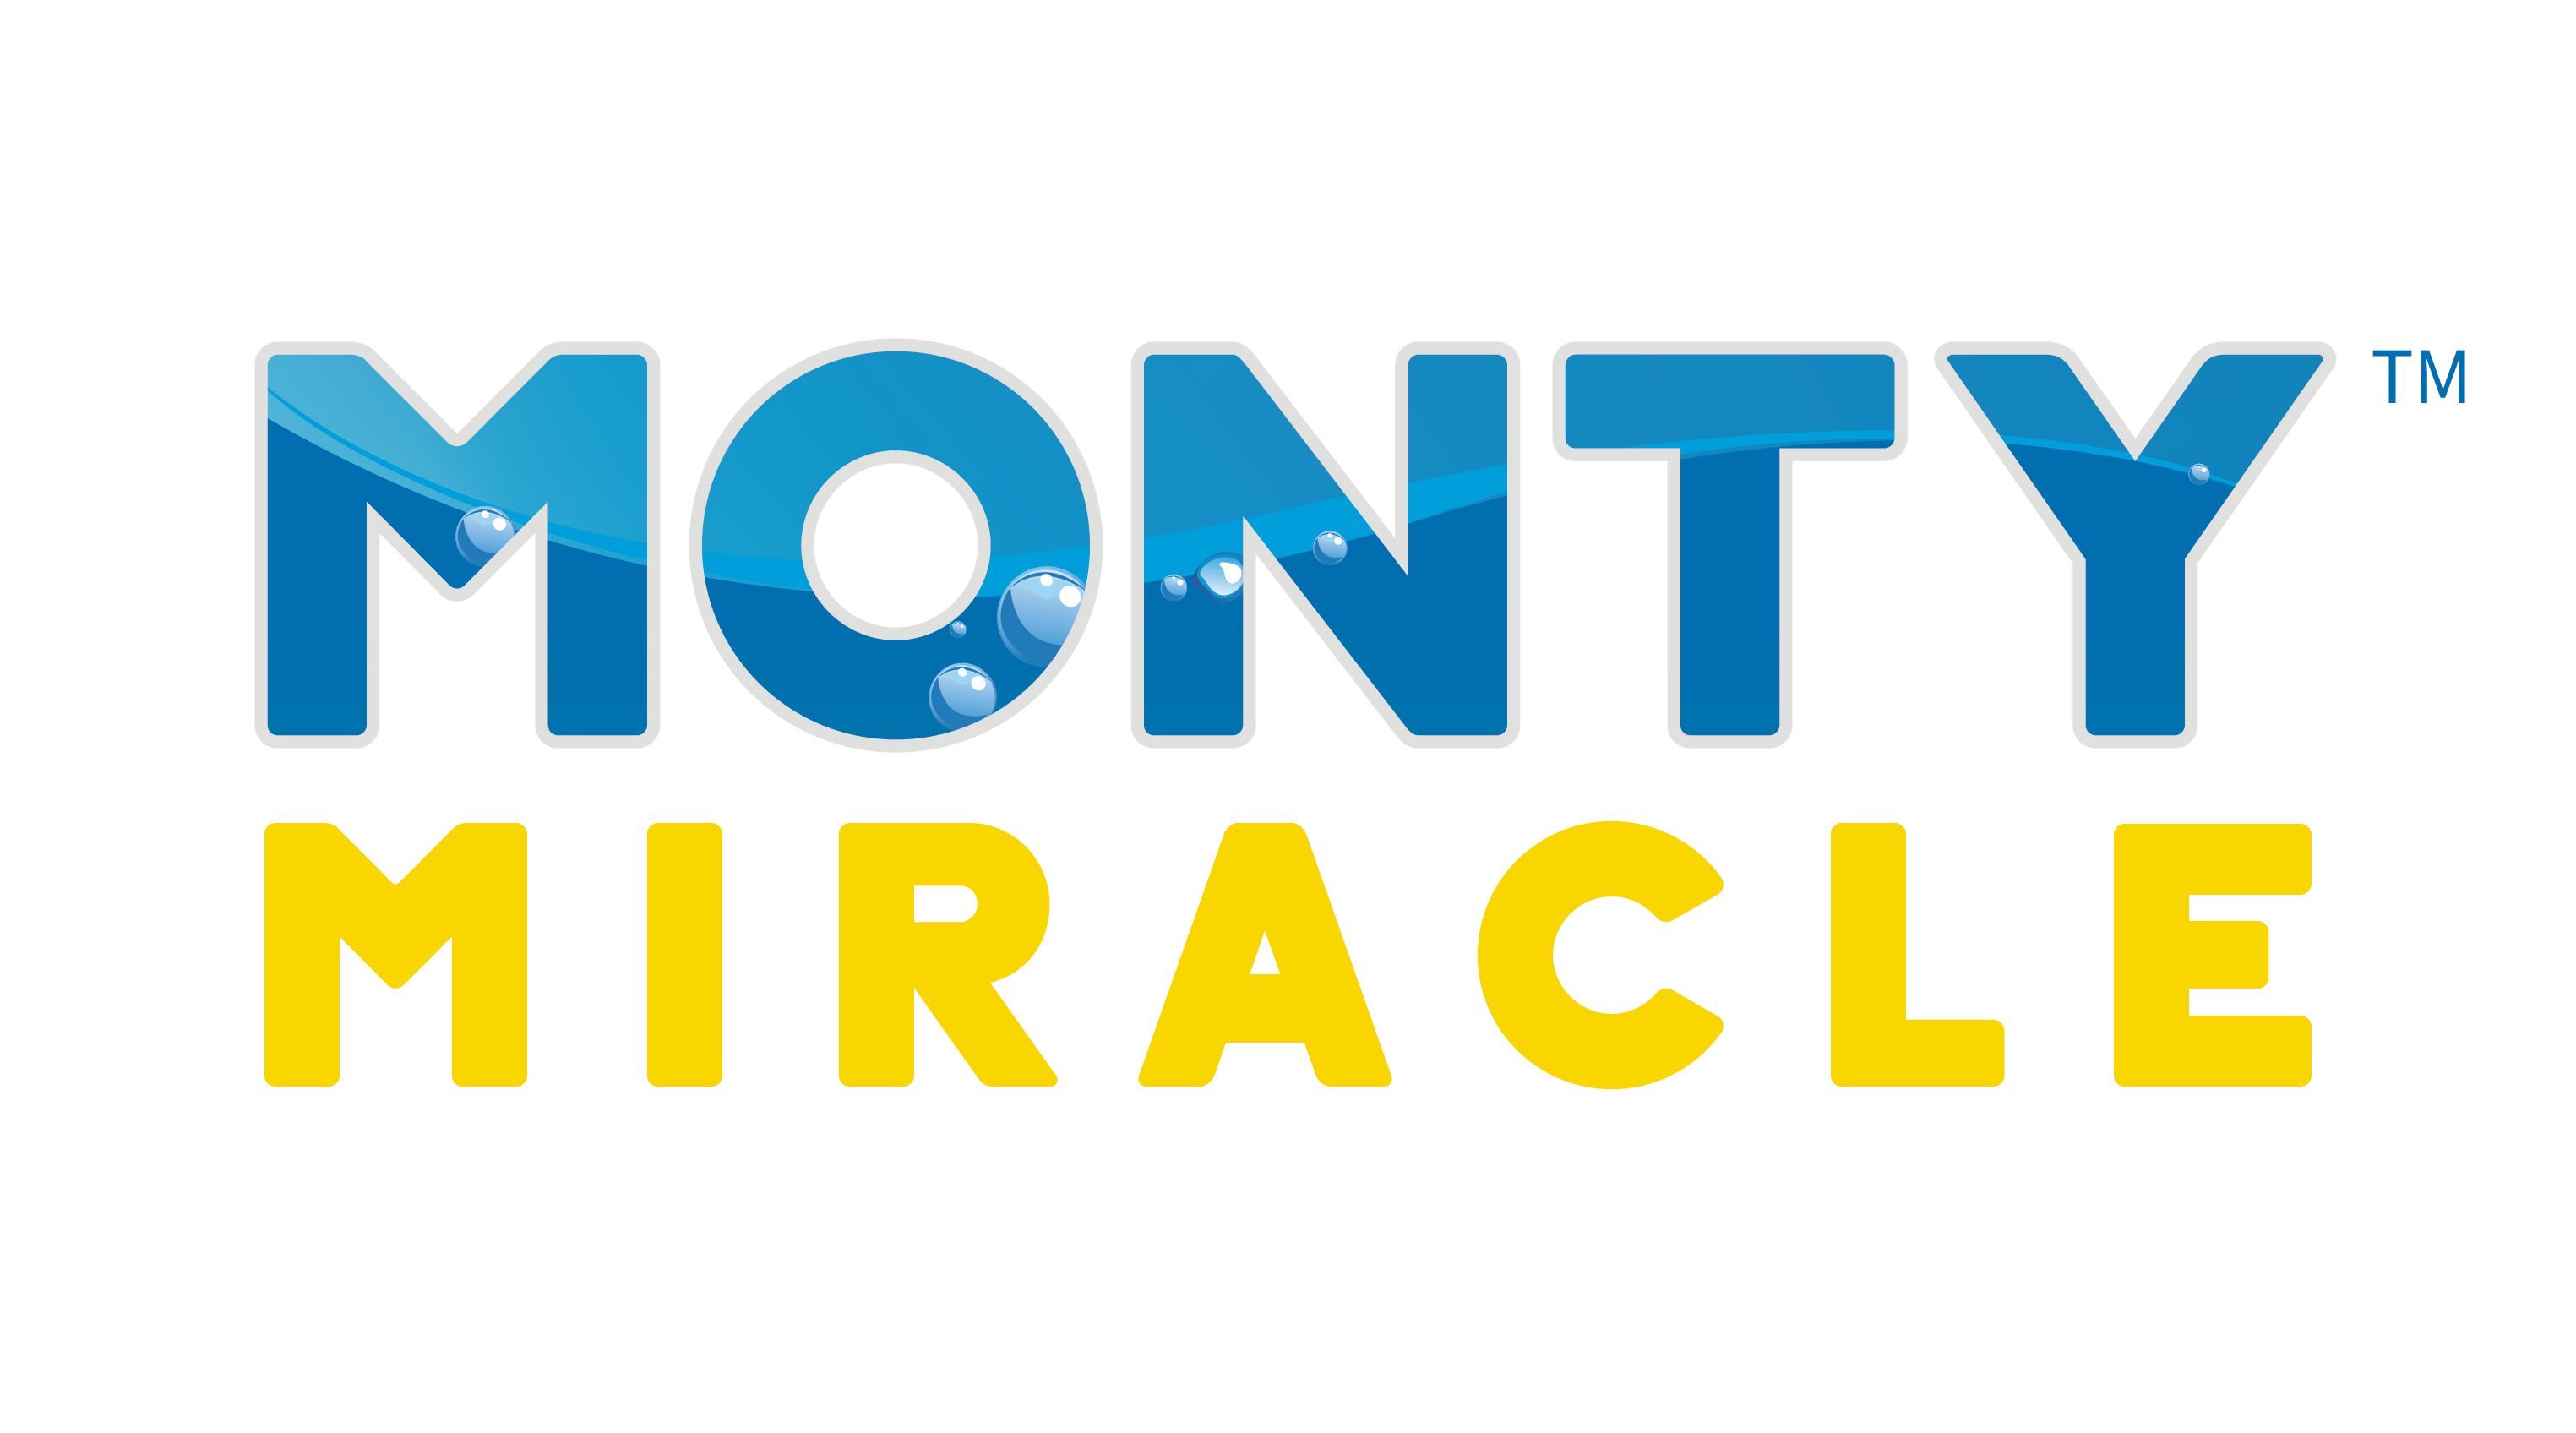 Monty Miracle